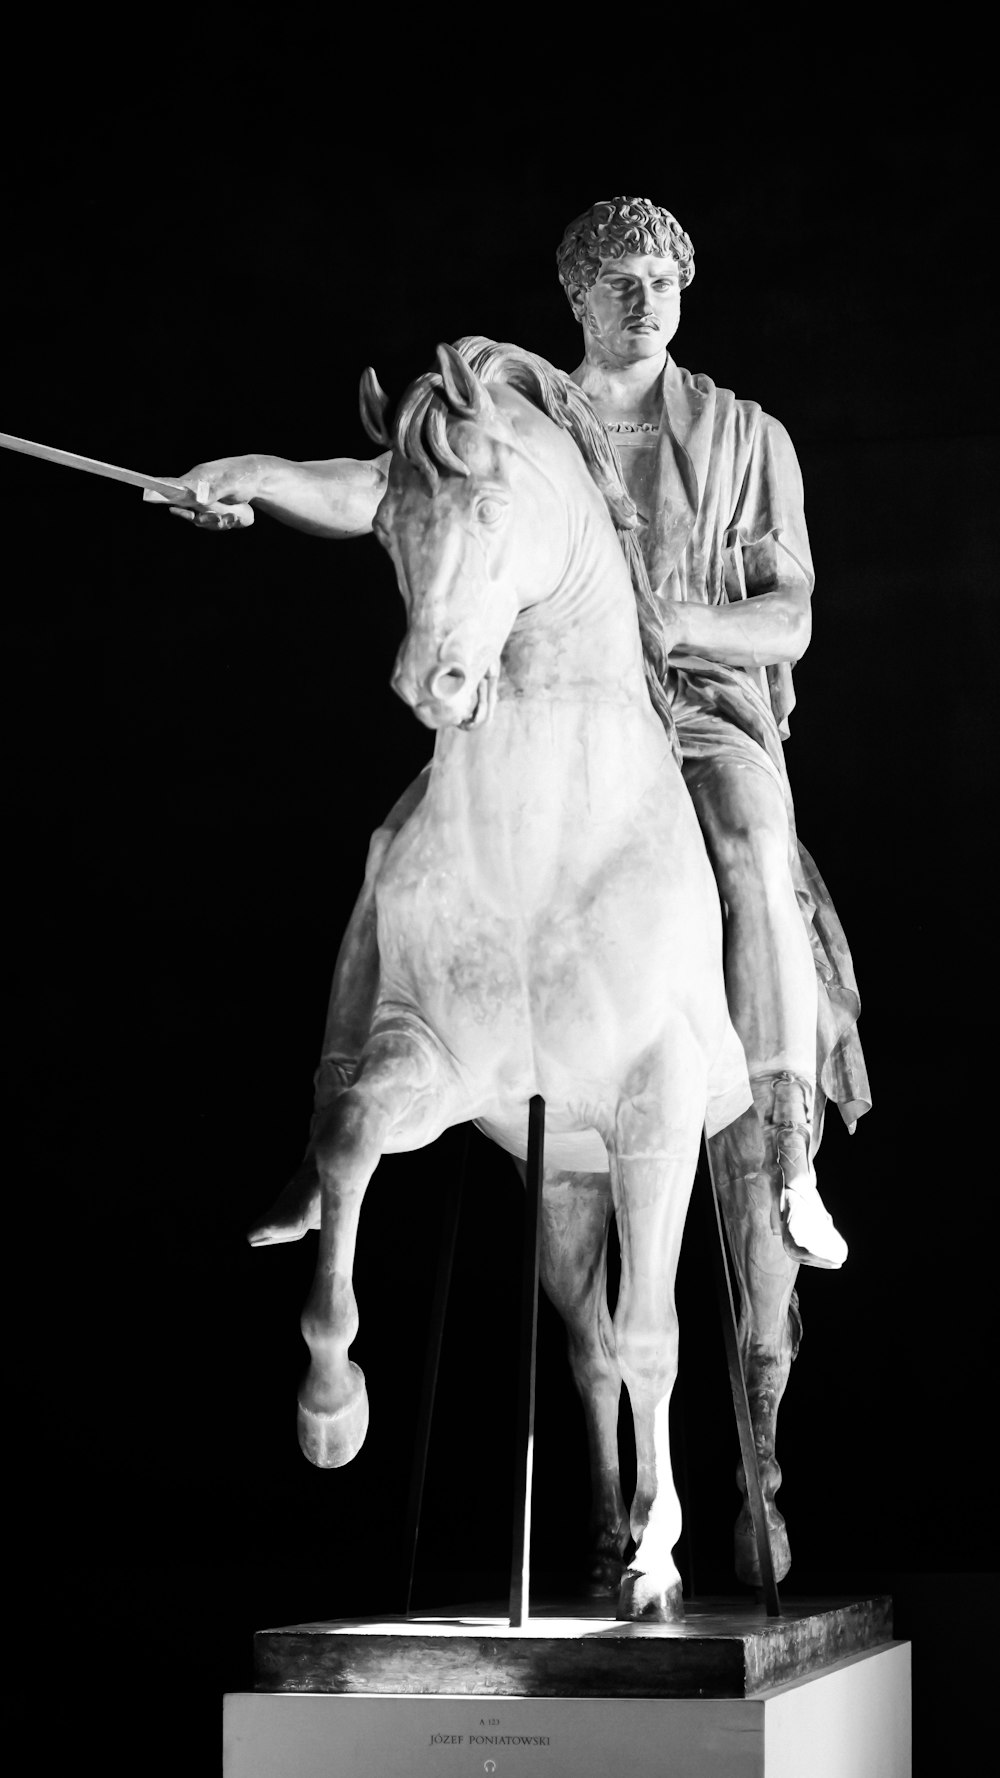 a black and white photo of a statue of a man on a horse